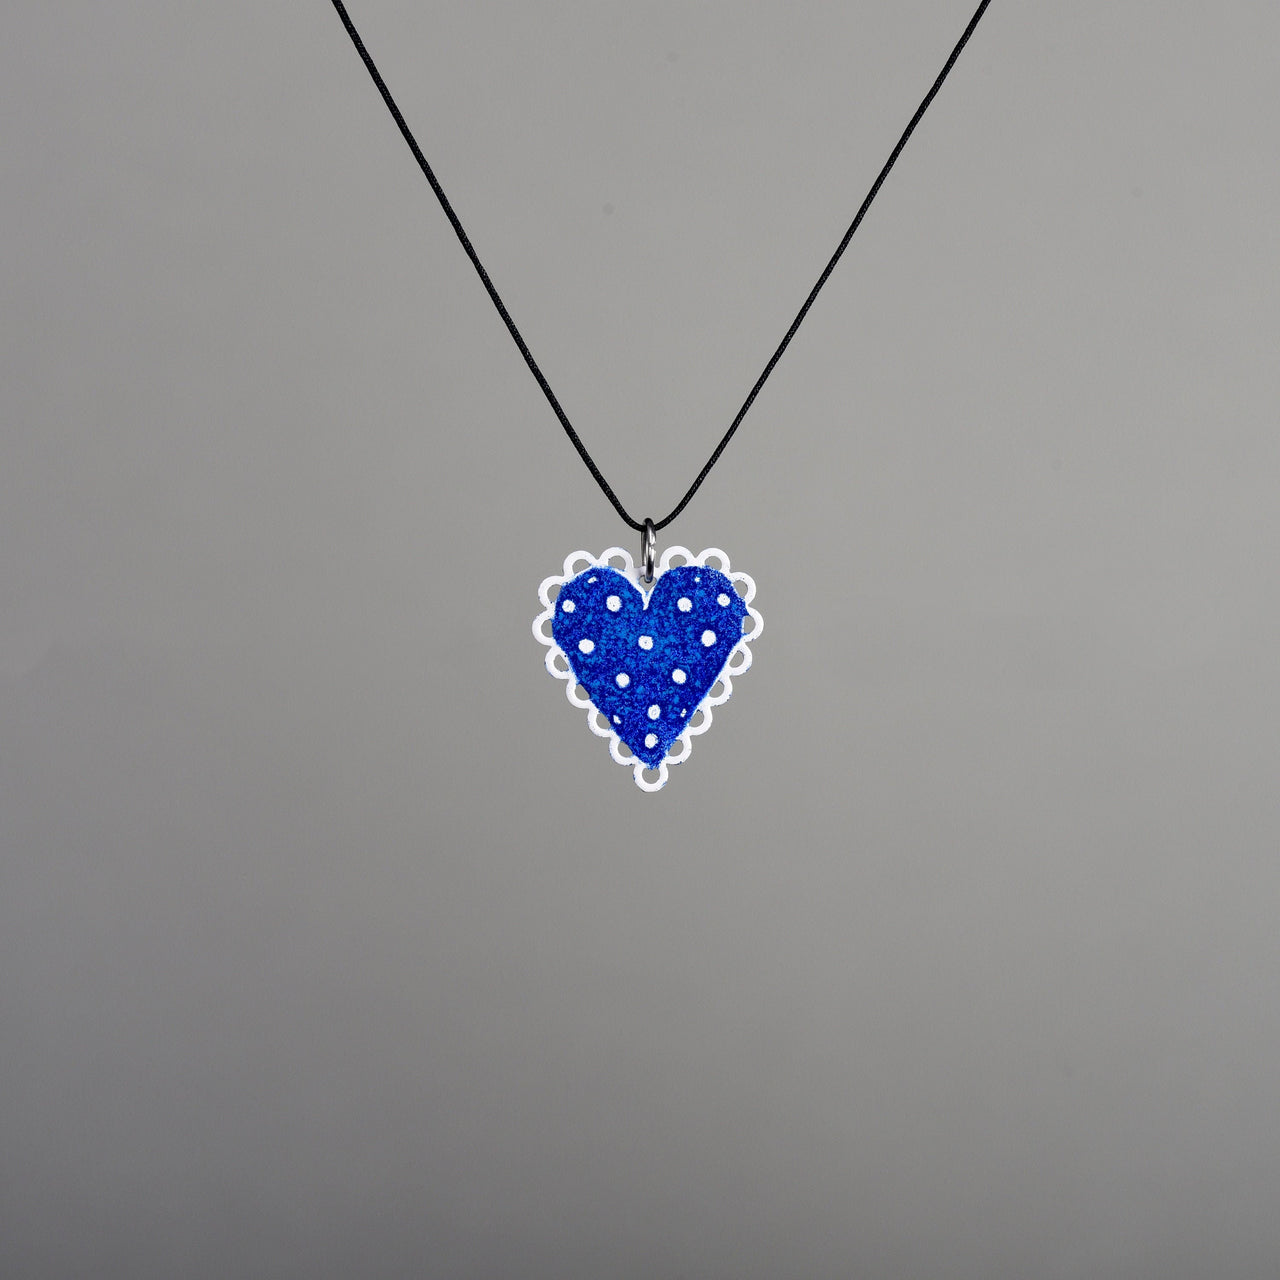 Blue Heart with Polka Dots Pendant